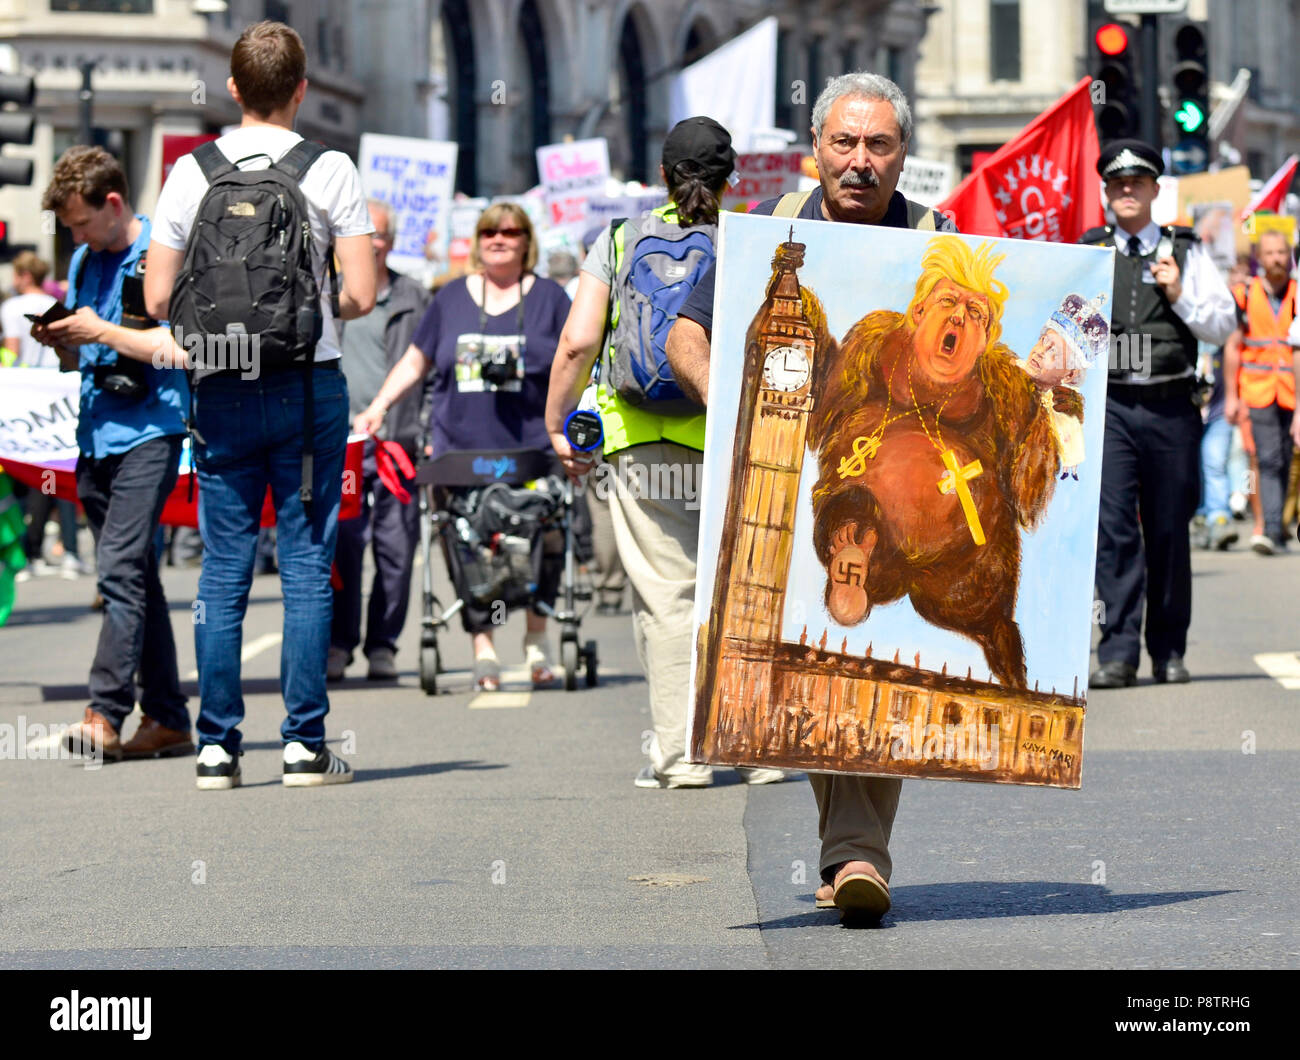 London, 13th July. Thousands march from Portland Place to Parliament Square to protest against President Donald Trump's visit to the UK. Political cartoonist Kaya Mar at the head of the first march with one of his works Credit: PjrFoto/Alamy Live News Stock Photo